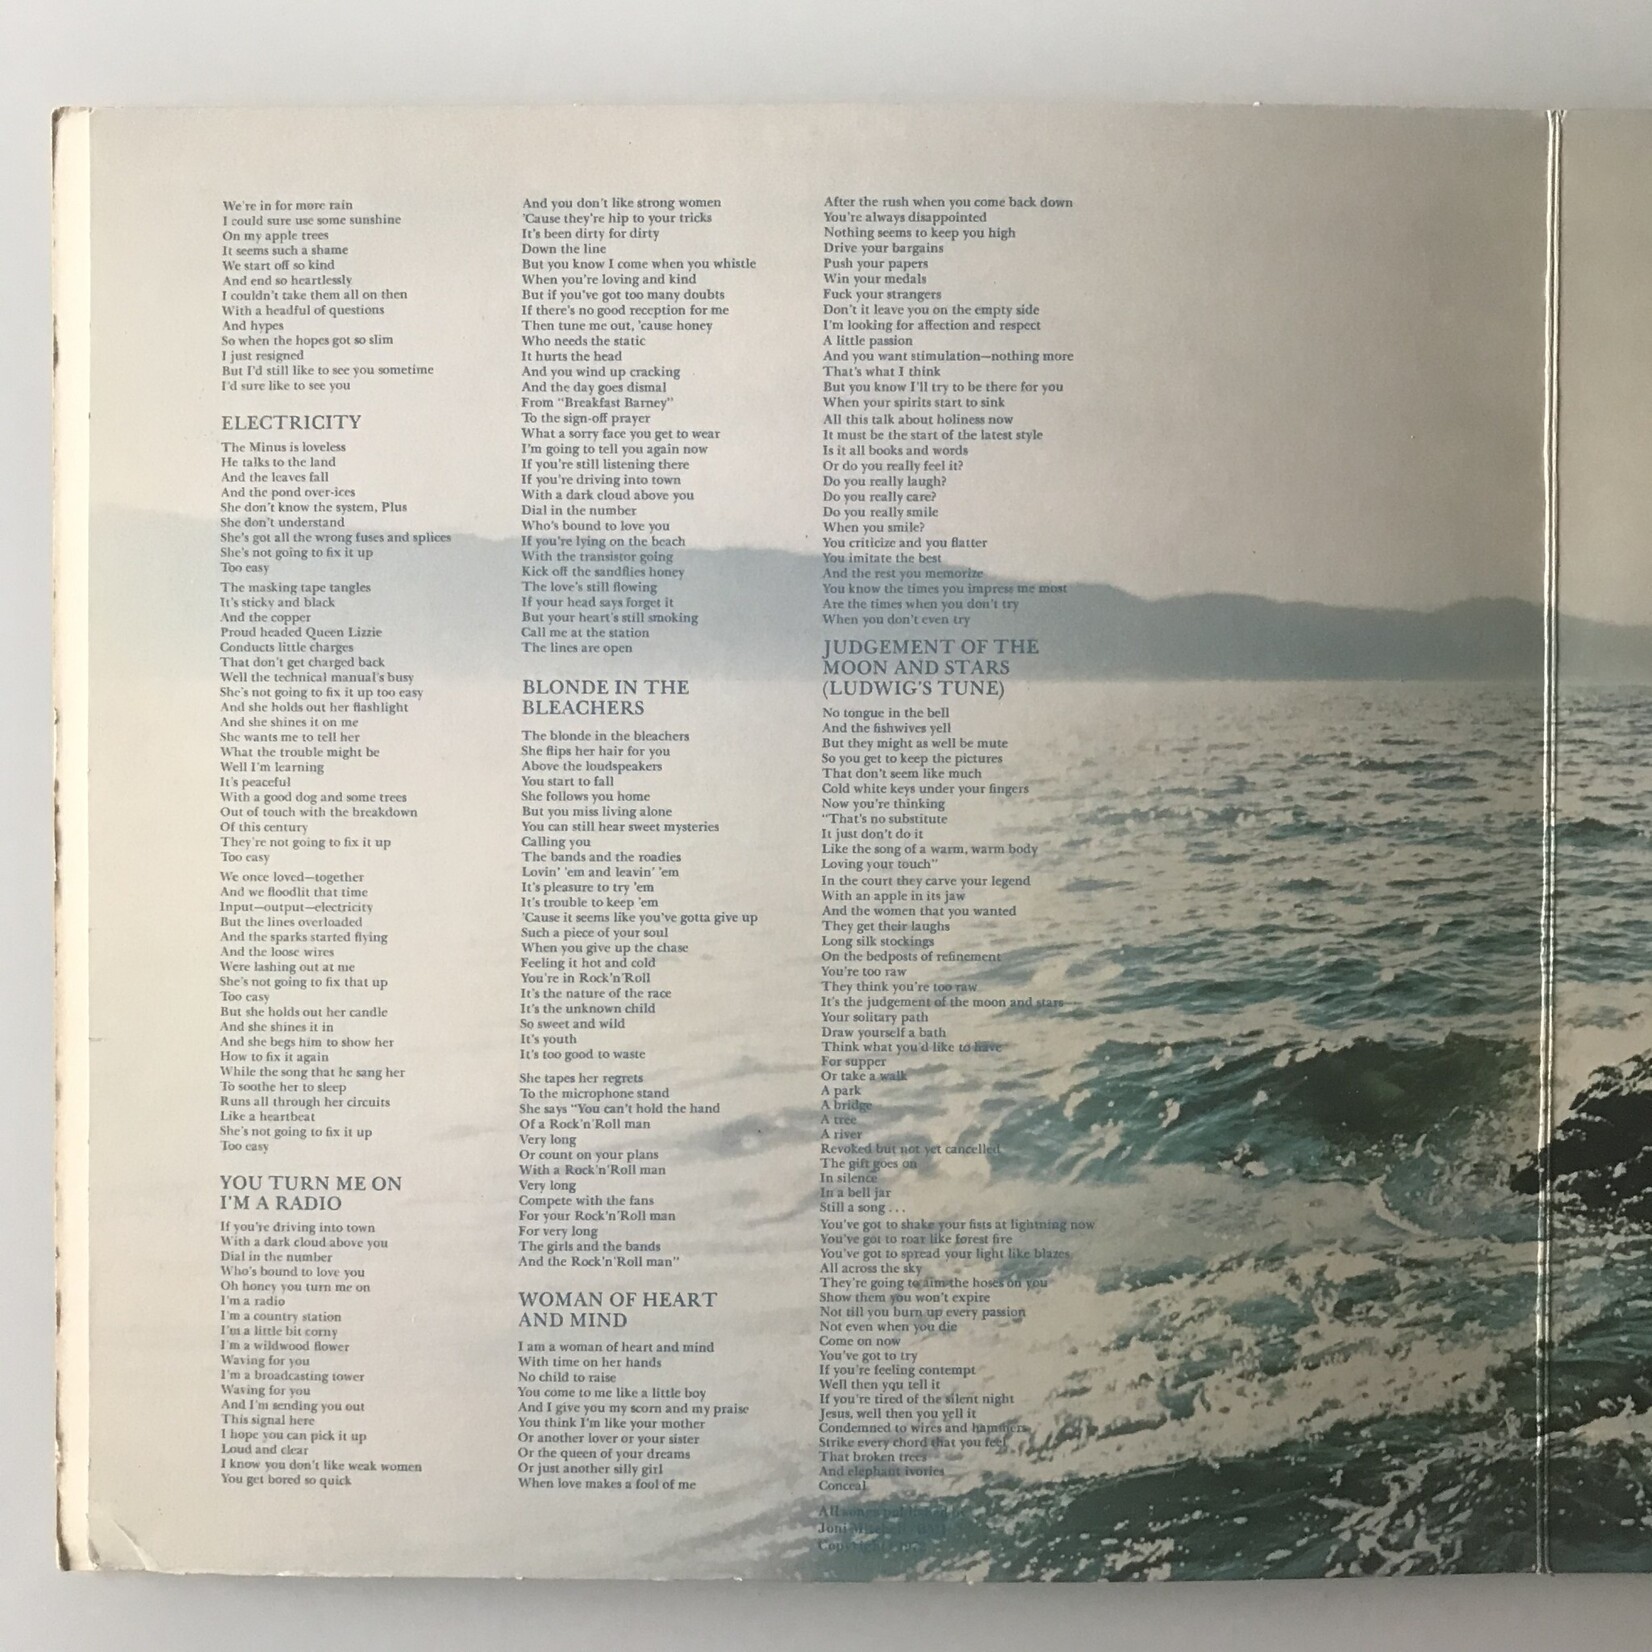 Joni Mitchell - For The Roses - SD 5057 - Vinyl LP (USED)